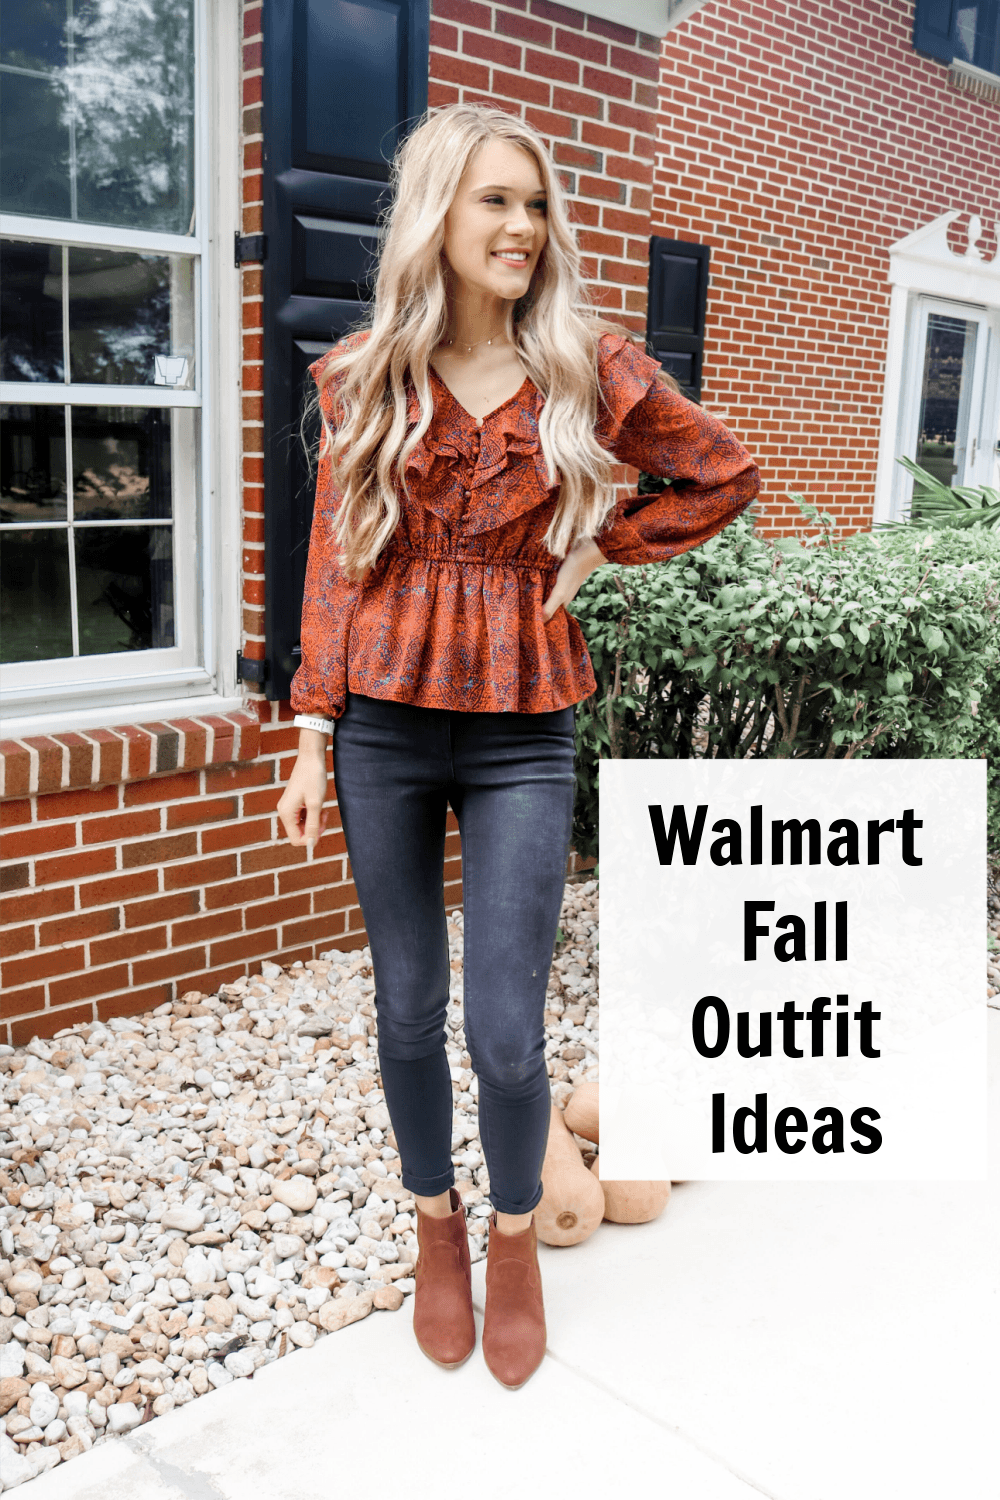 Fall outfit ideas 2020